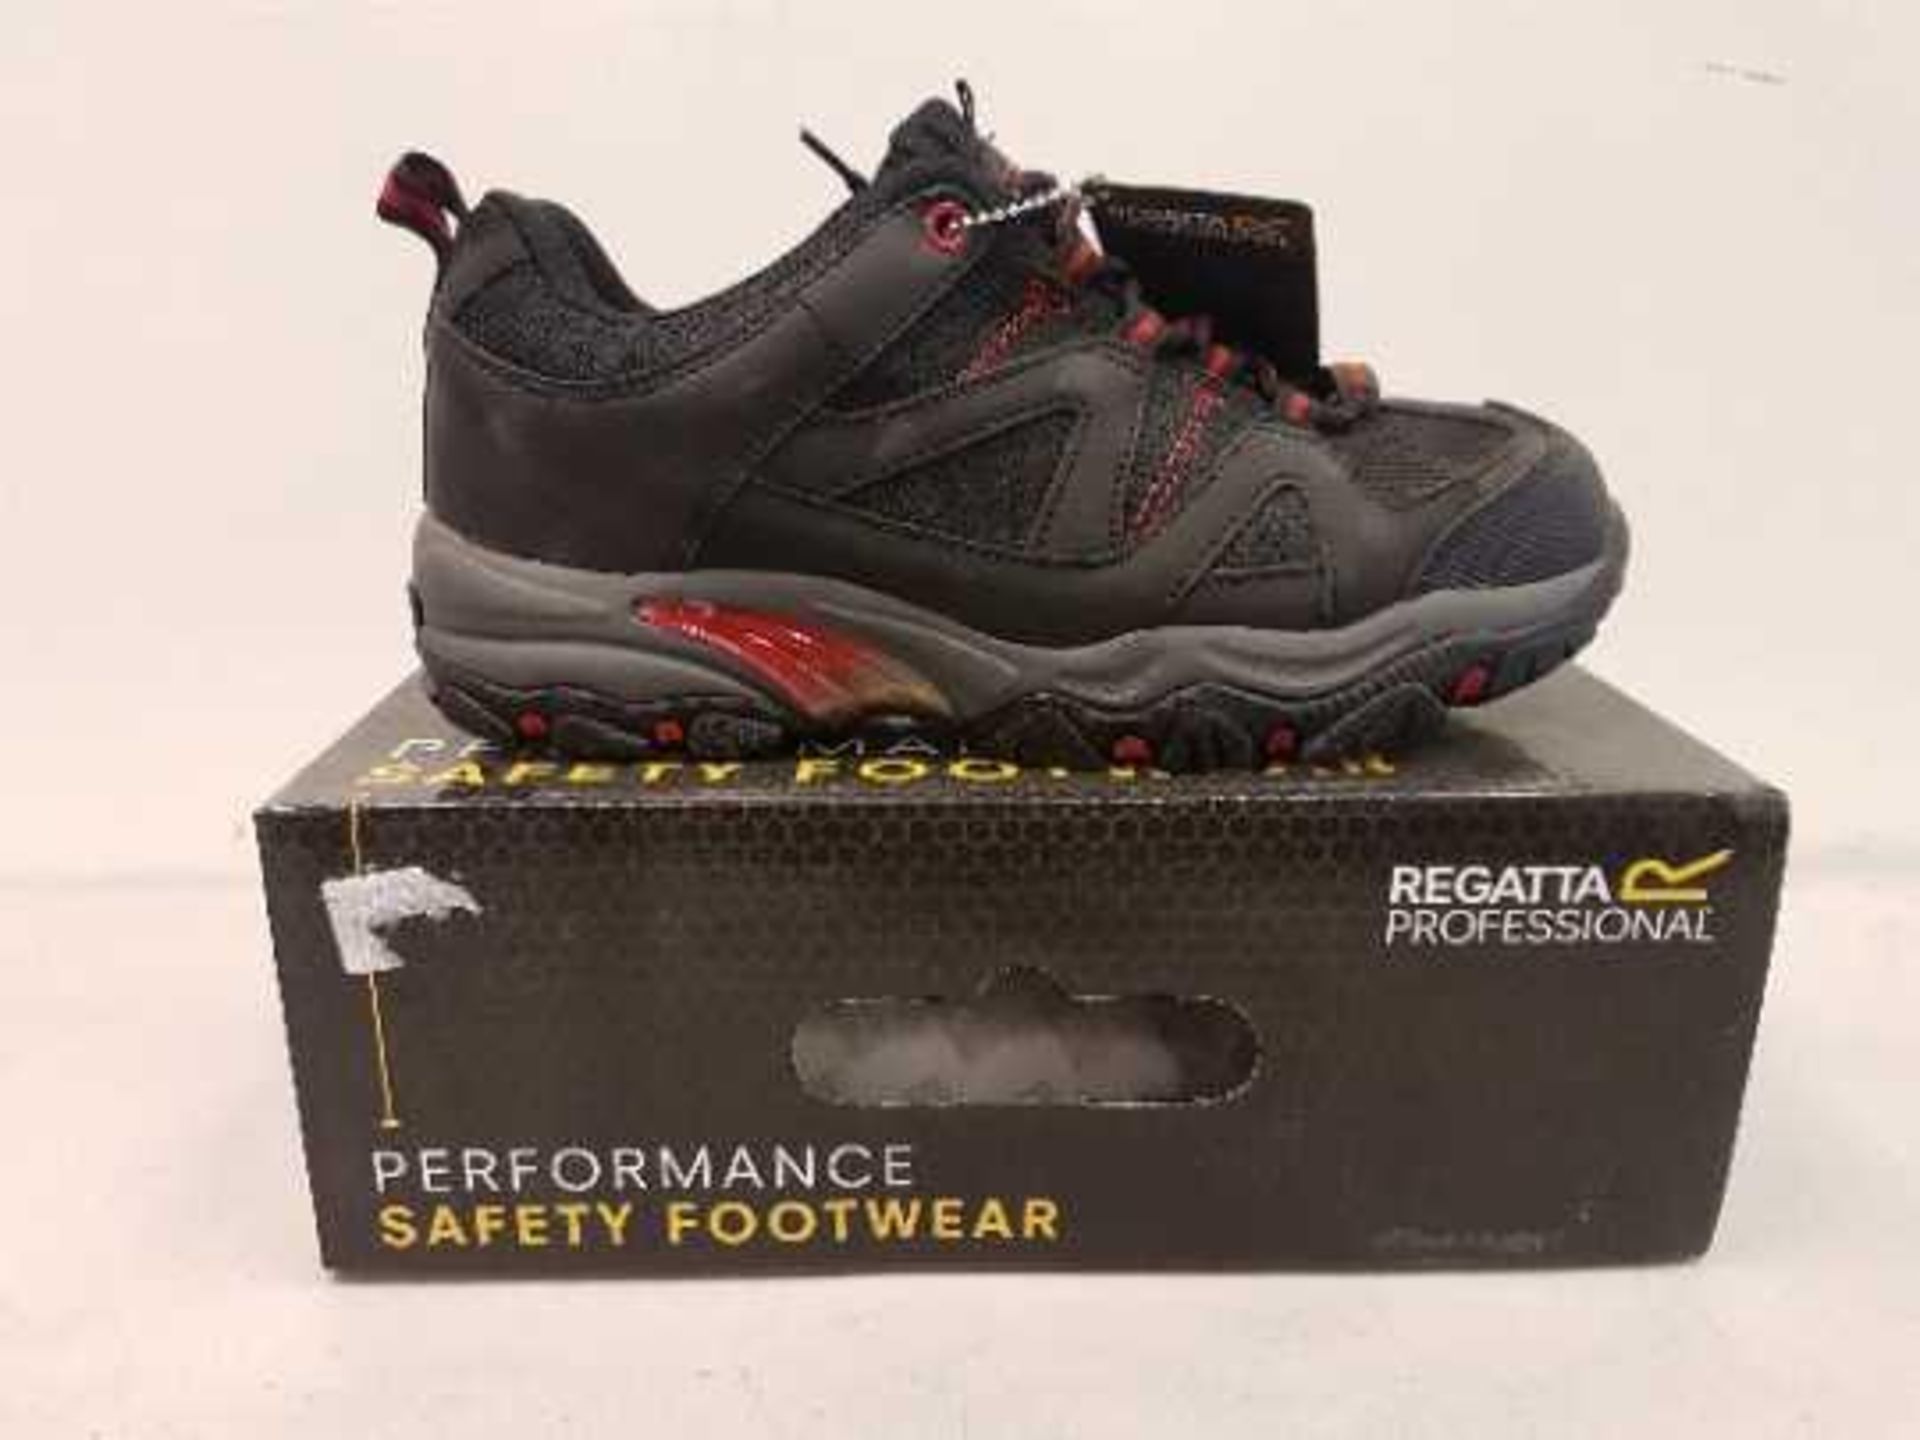 REGATTA HARDWEAR RIVERBECK S1P SAFETY TRAINERS. Size 9 (EUR 43). New and boxed.  Material: PU,